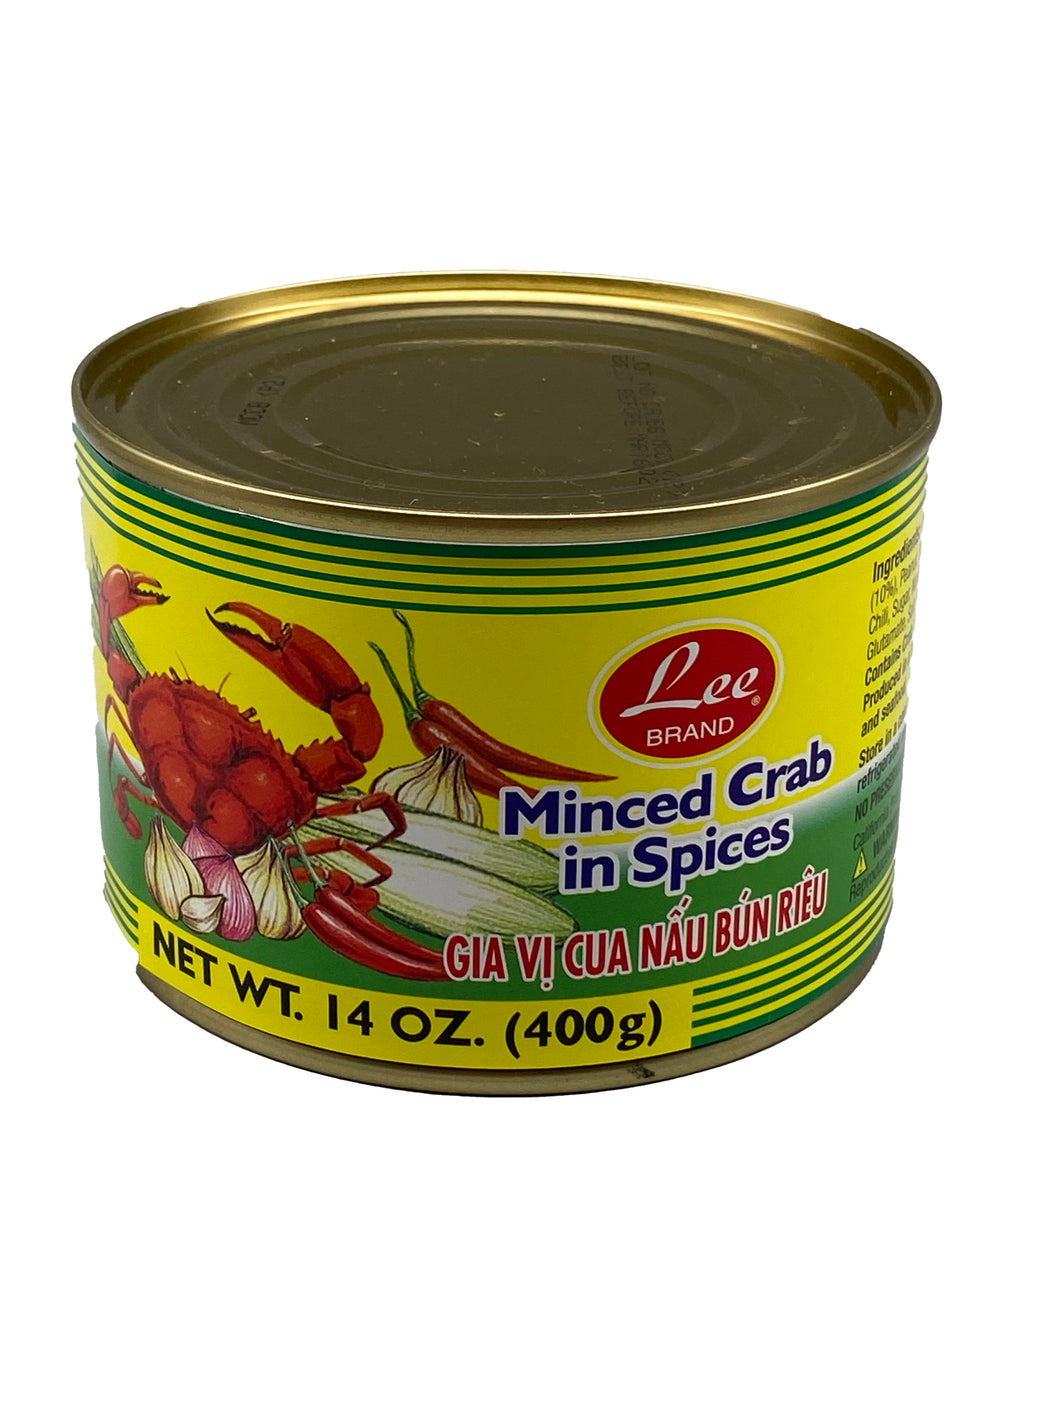 Lee Minced Crab in Spices